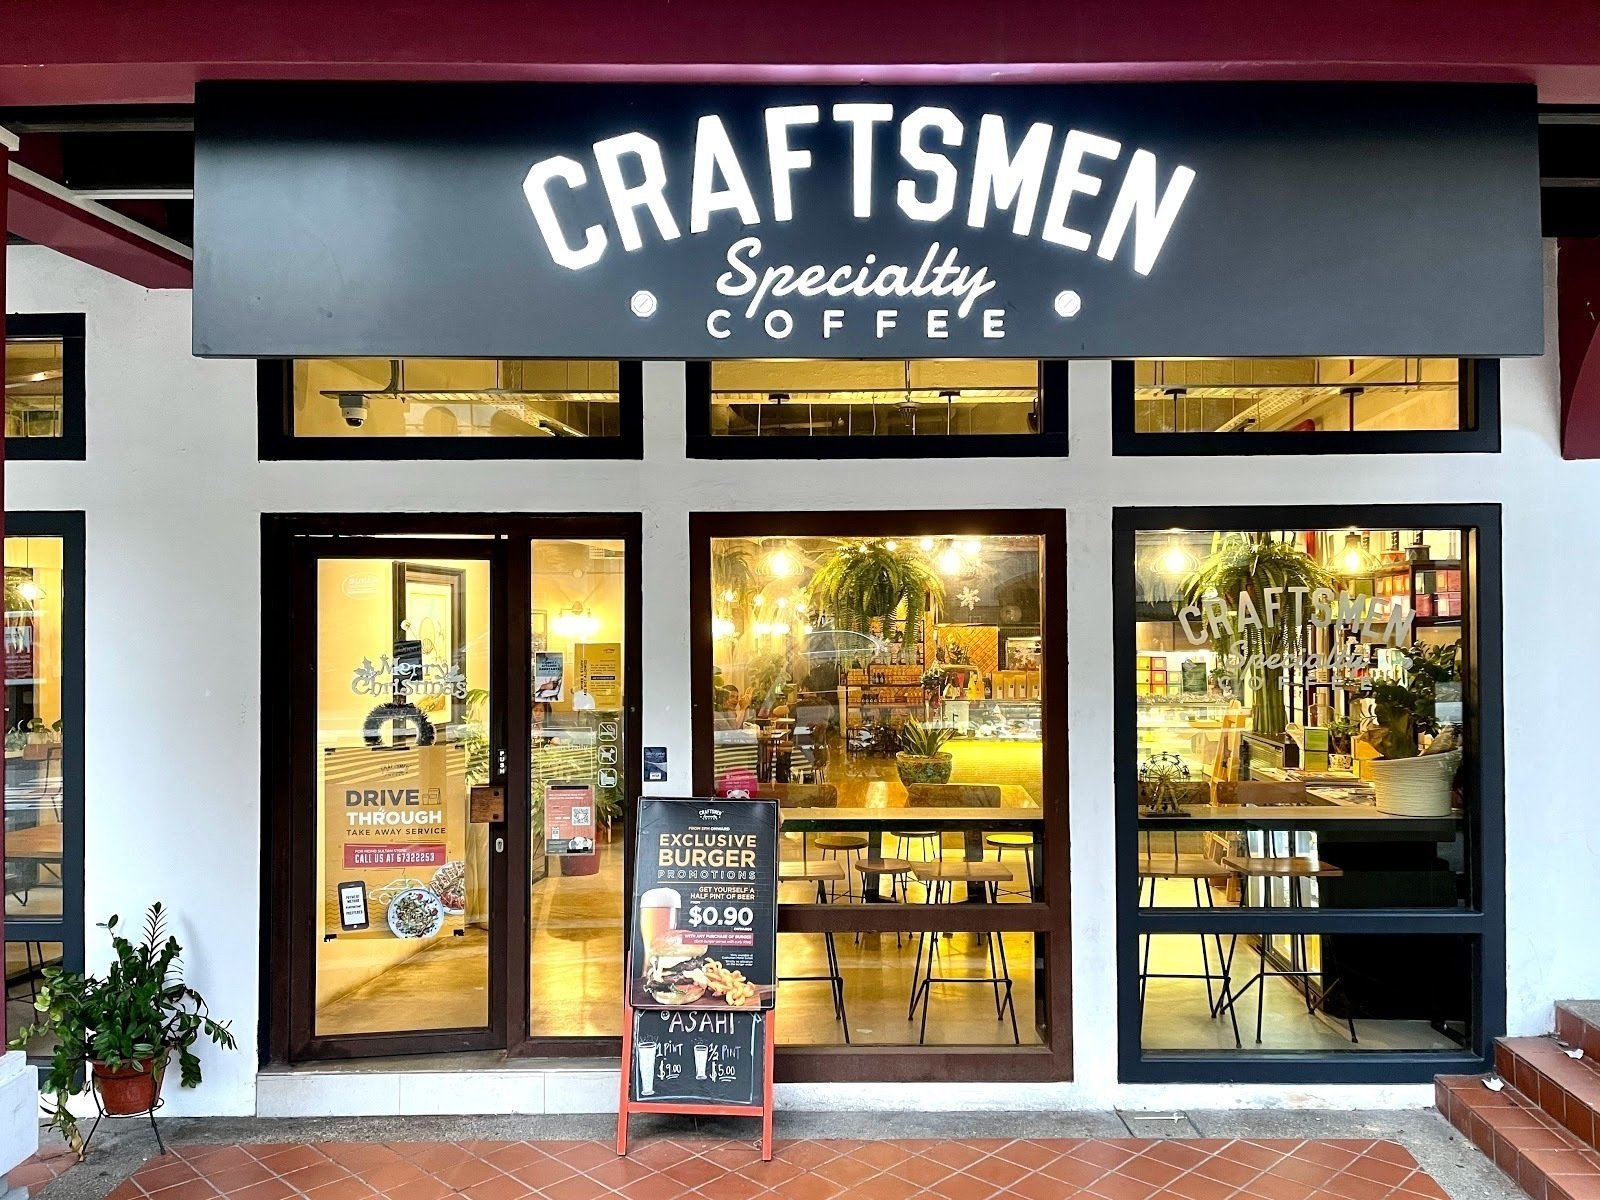 <span class="translation_missing" title="translation missing: en.meta.location_title, location_name: Craftsmen Specialty Coffee (Mohamed Sultan), city: Singapore">Location Title</span>